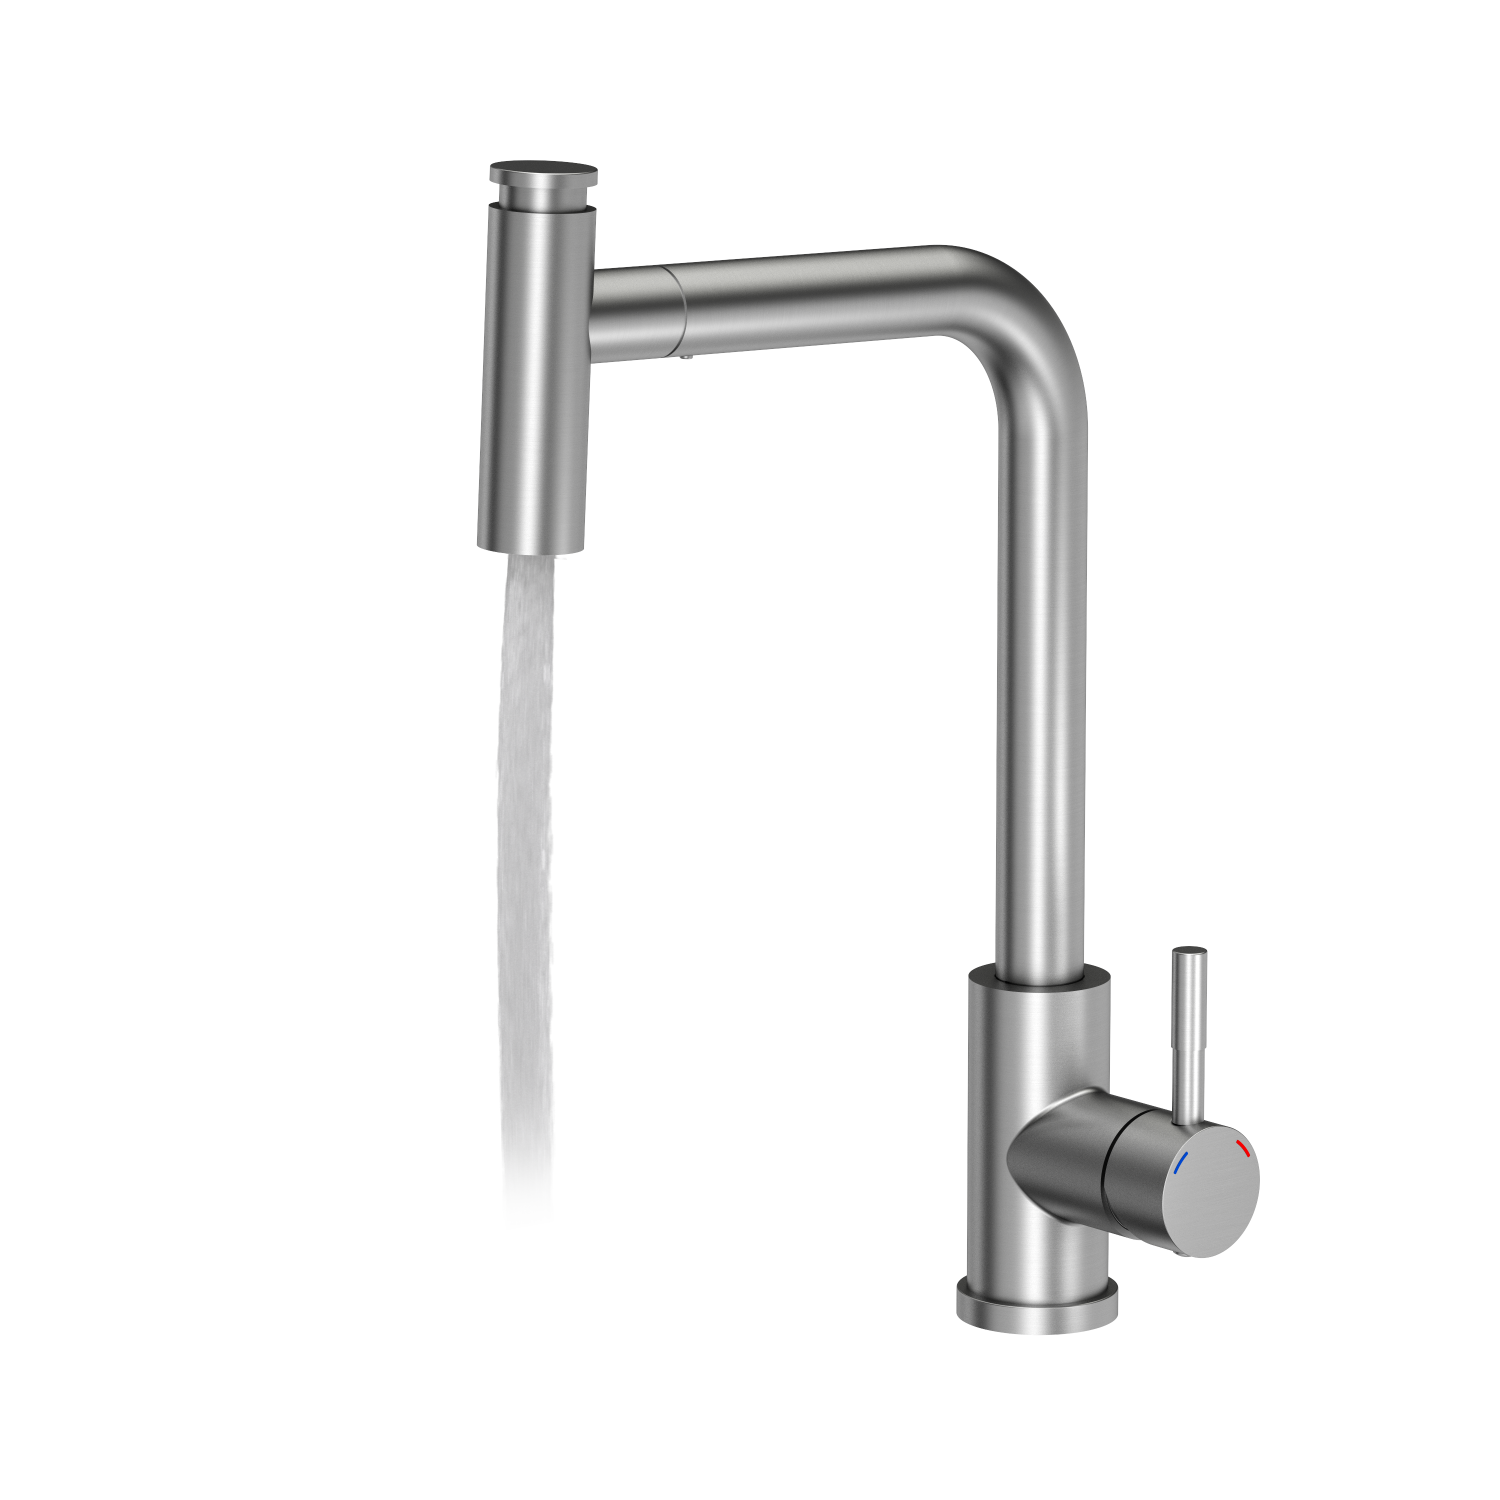 Quadron Meryl pull our tap with spray function, Brushed Steel